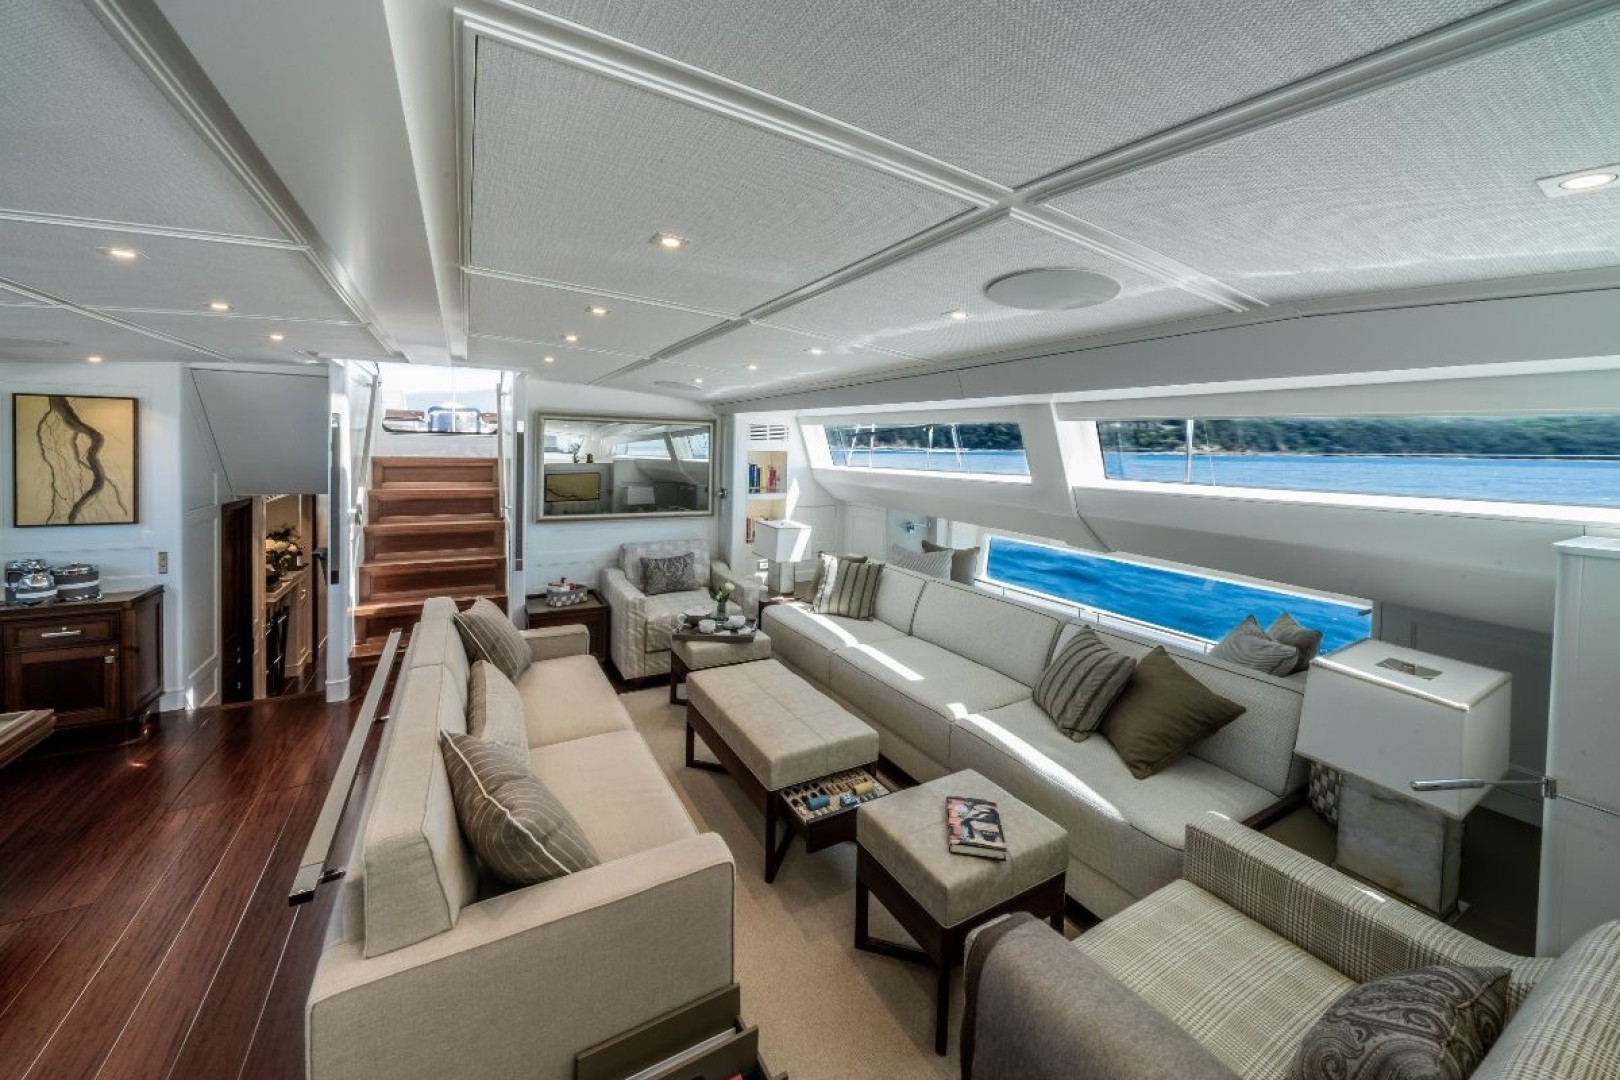 Swan 120 - Audrey The First wins the Boat International Design and Innovation Awards in the Interior Design category